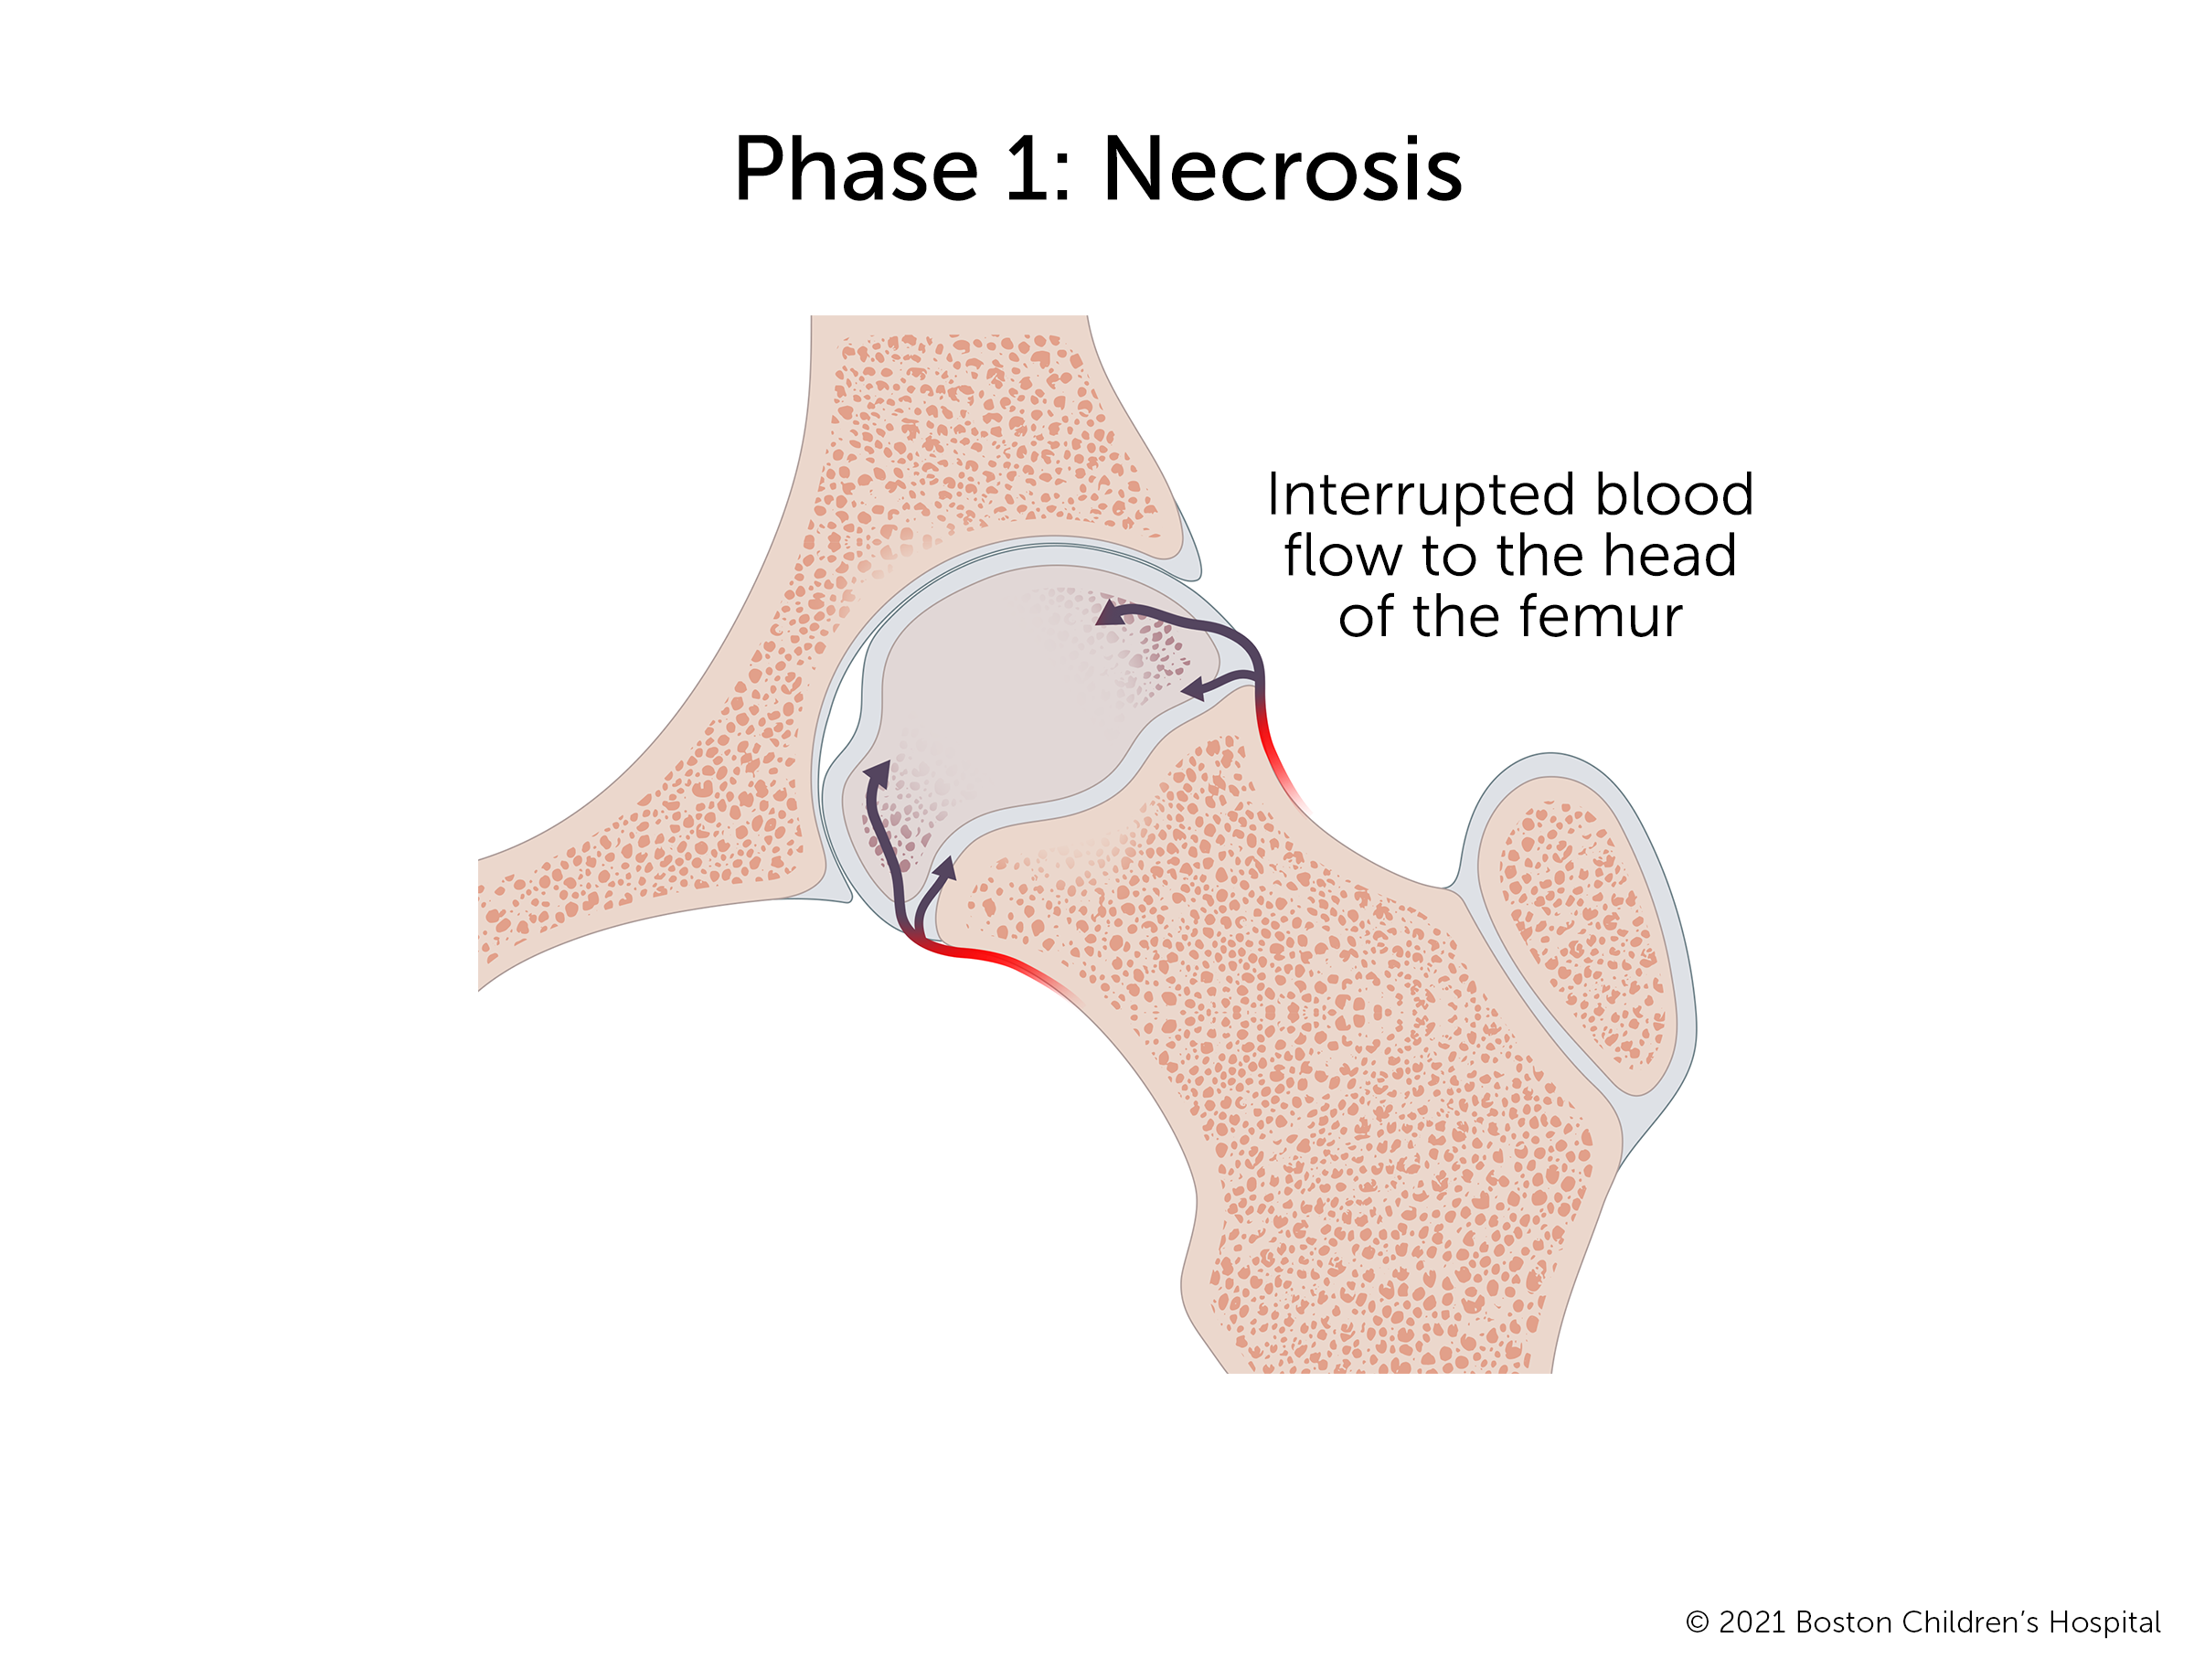 Phase 1: Necrosis. Interrupted blood flow to the head of the femur causes the femoral head to become misshapen and a pocket to open up in the hip socket.